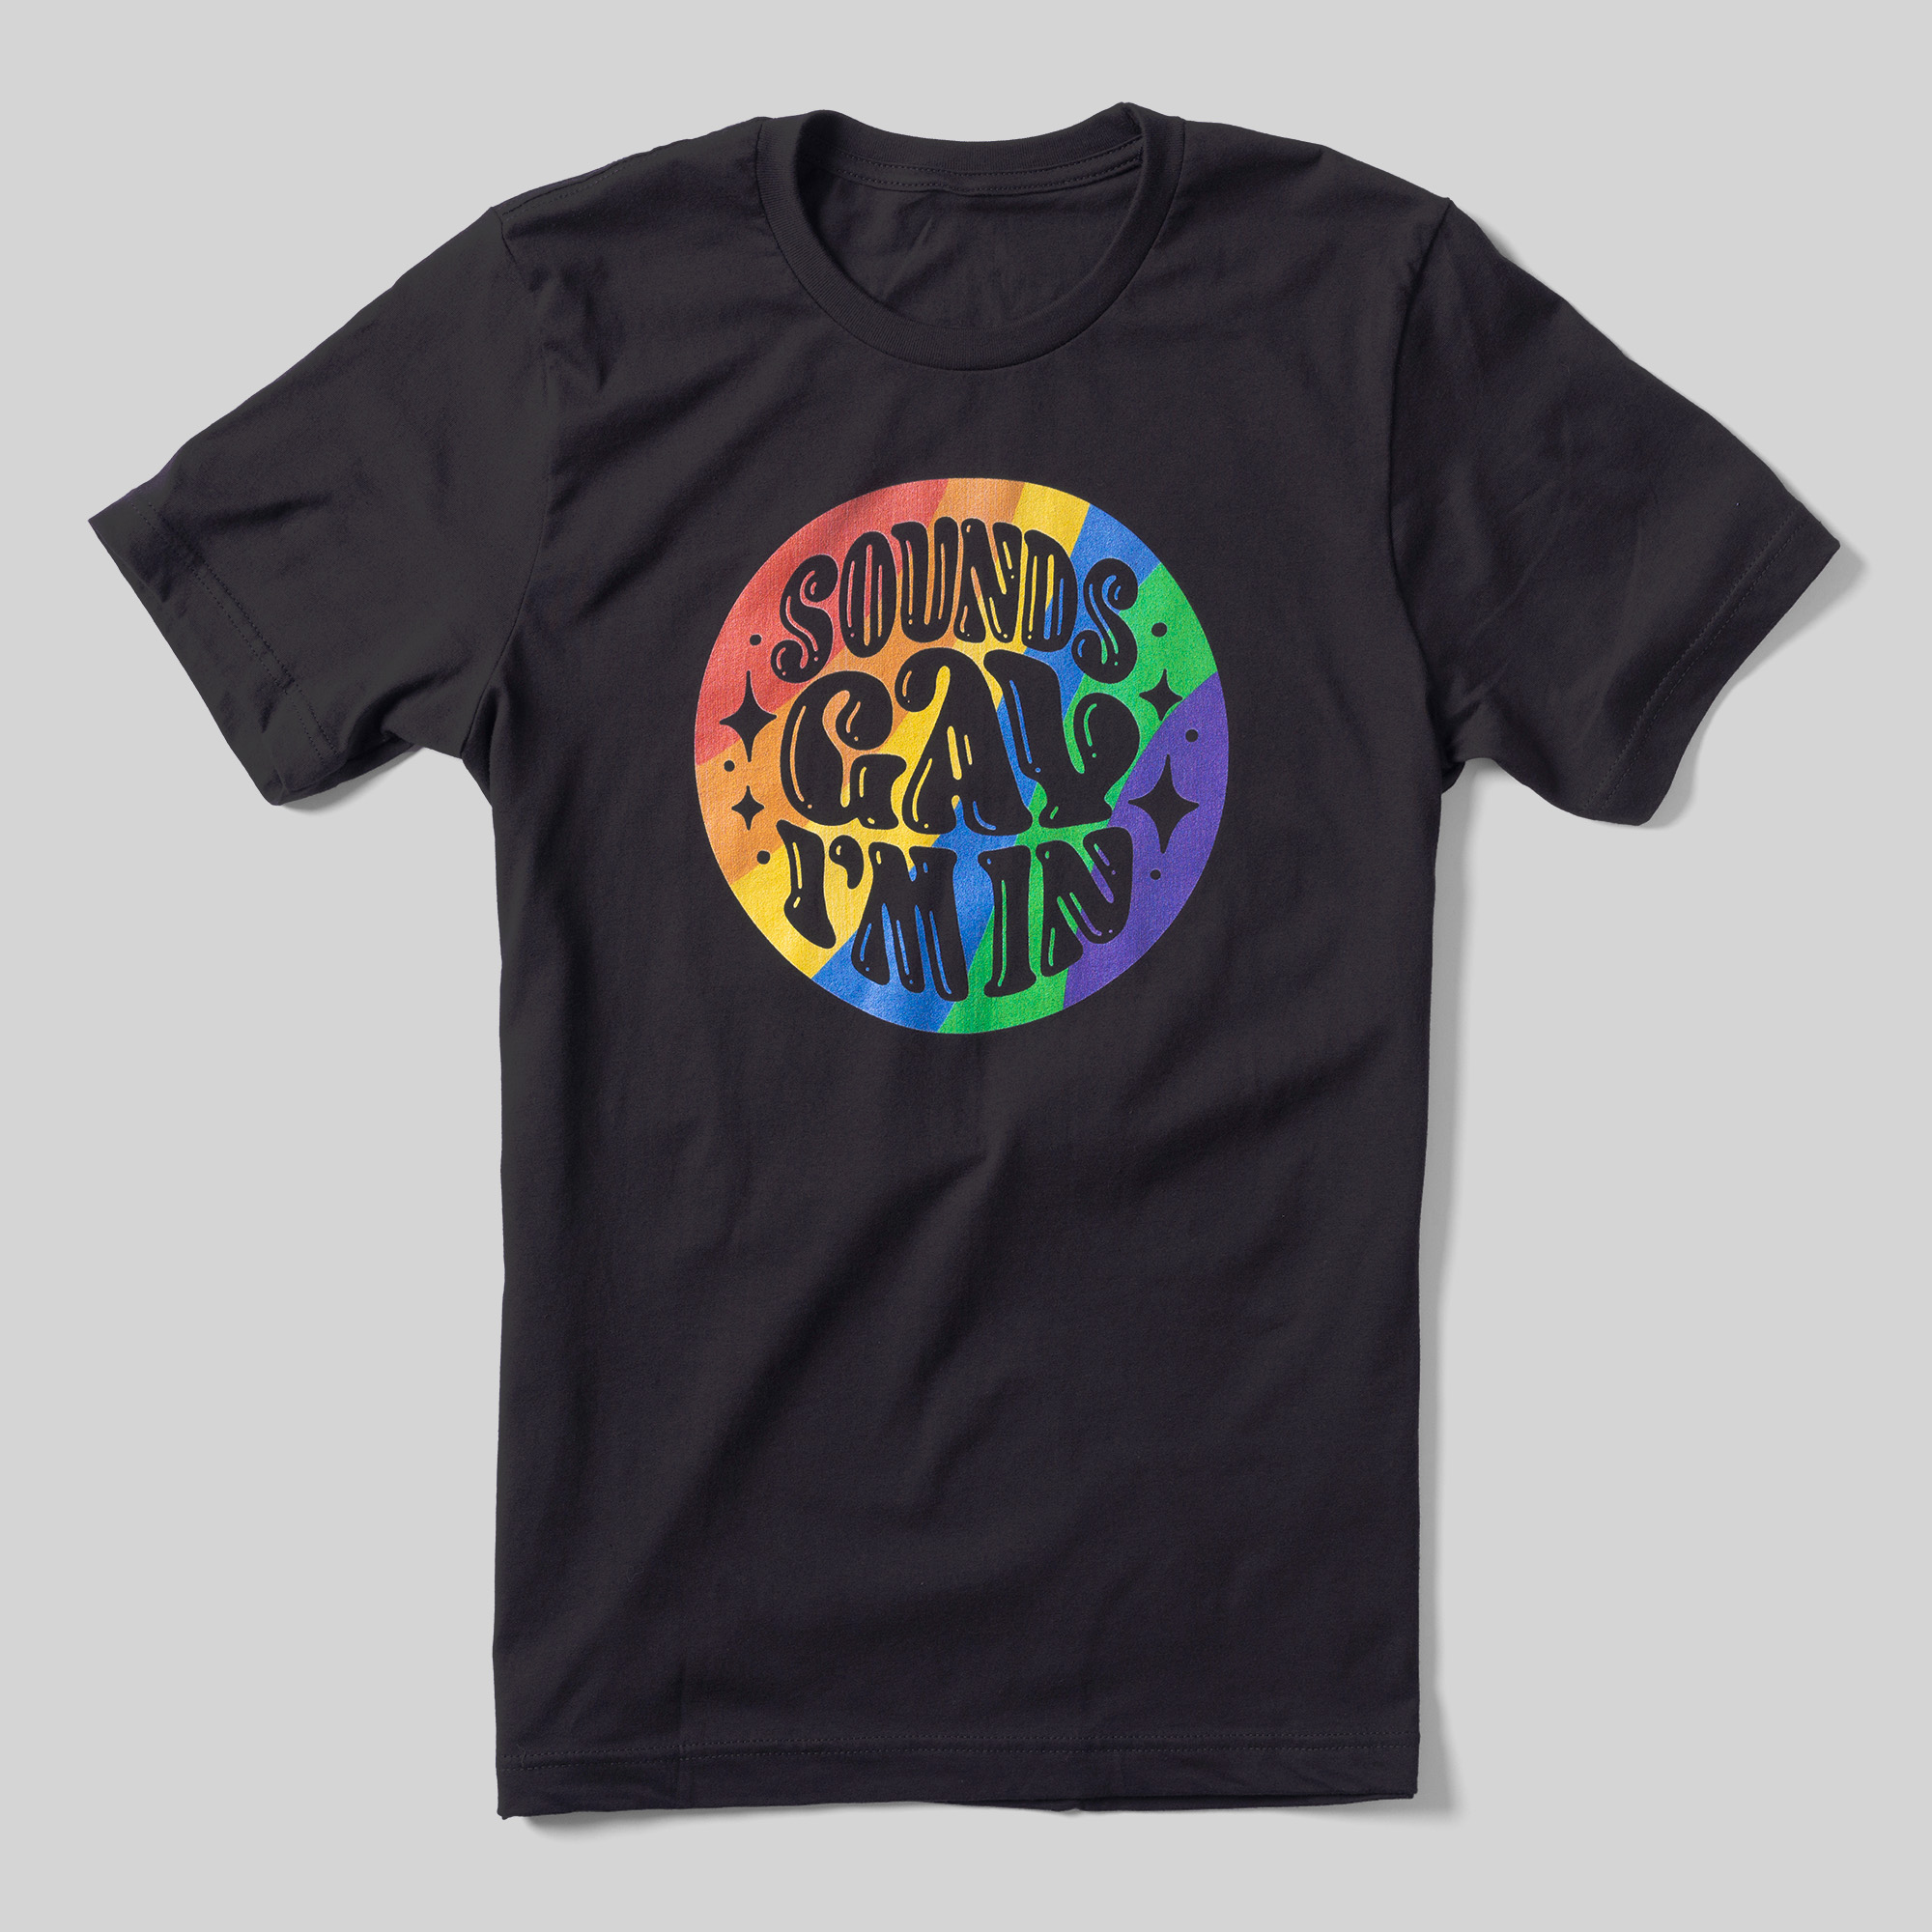 A black t-shirt that reads Sounds Gay, I'm In inside of a rainbow colored circle.